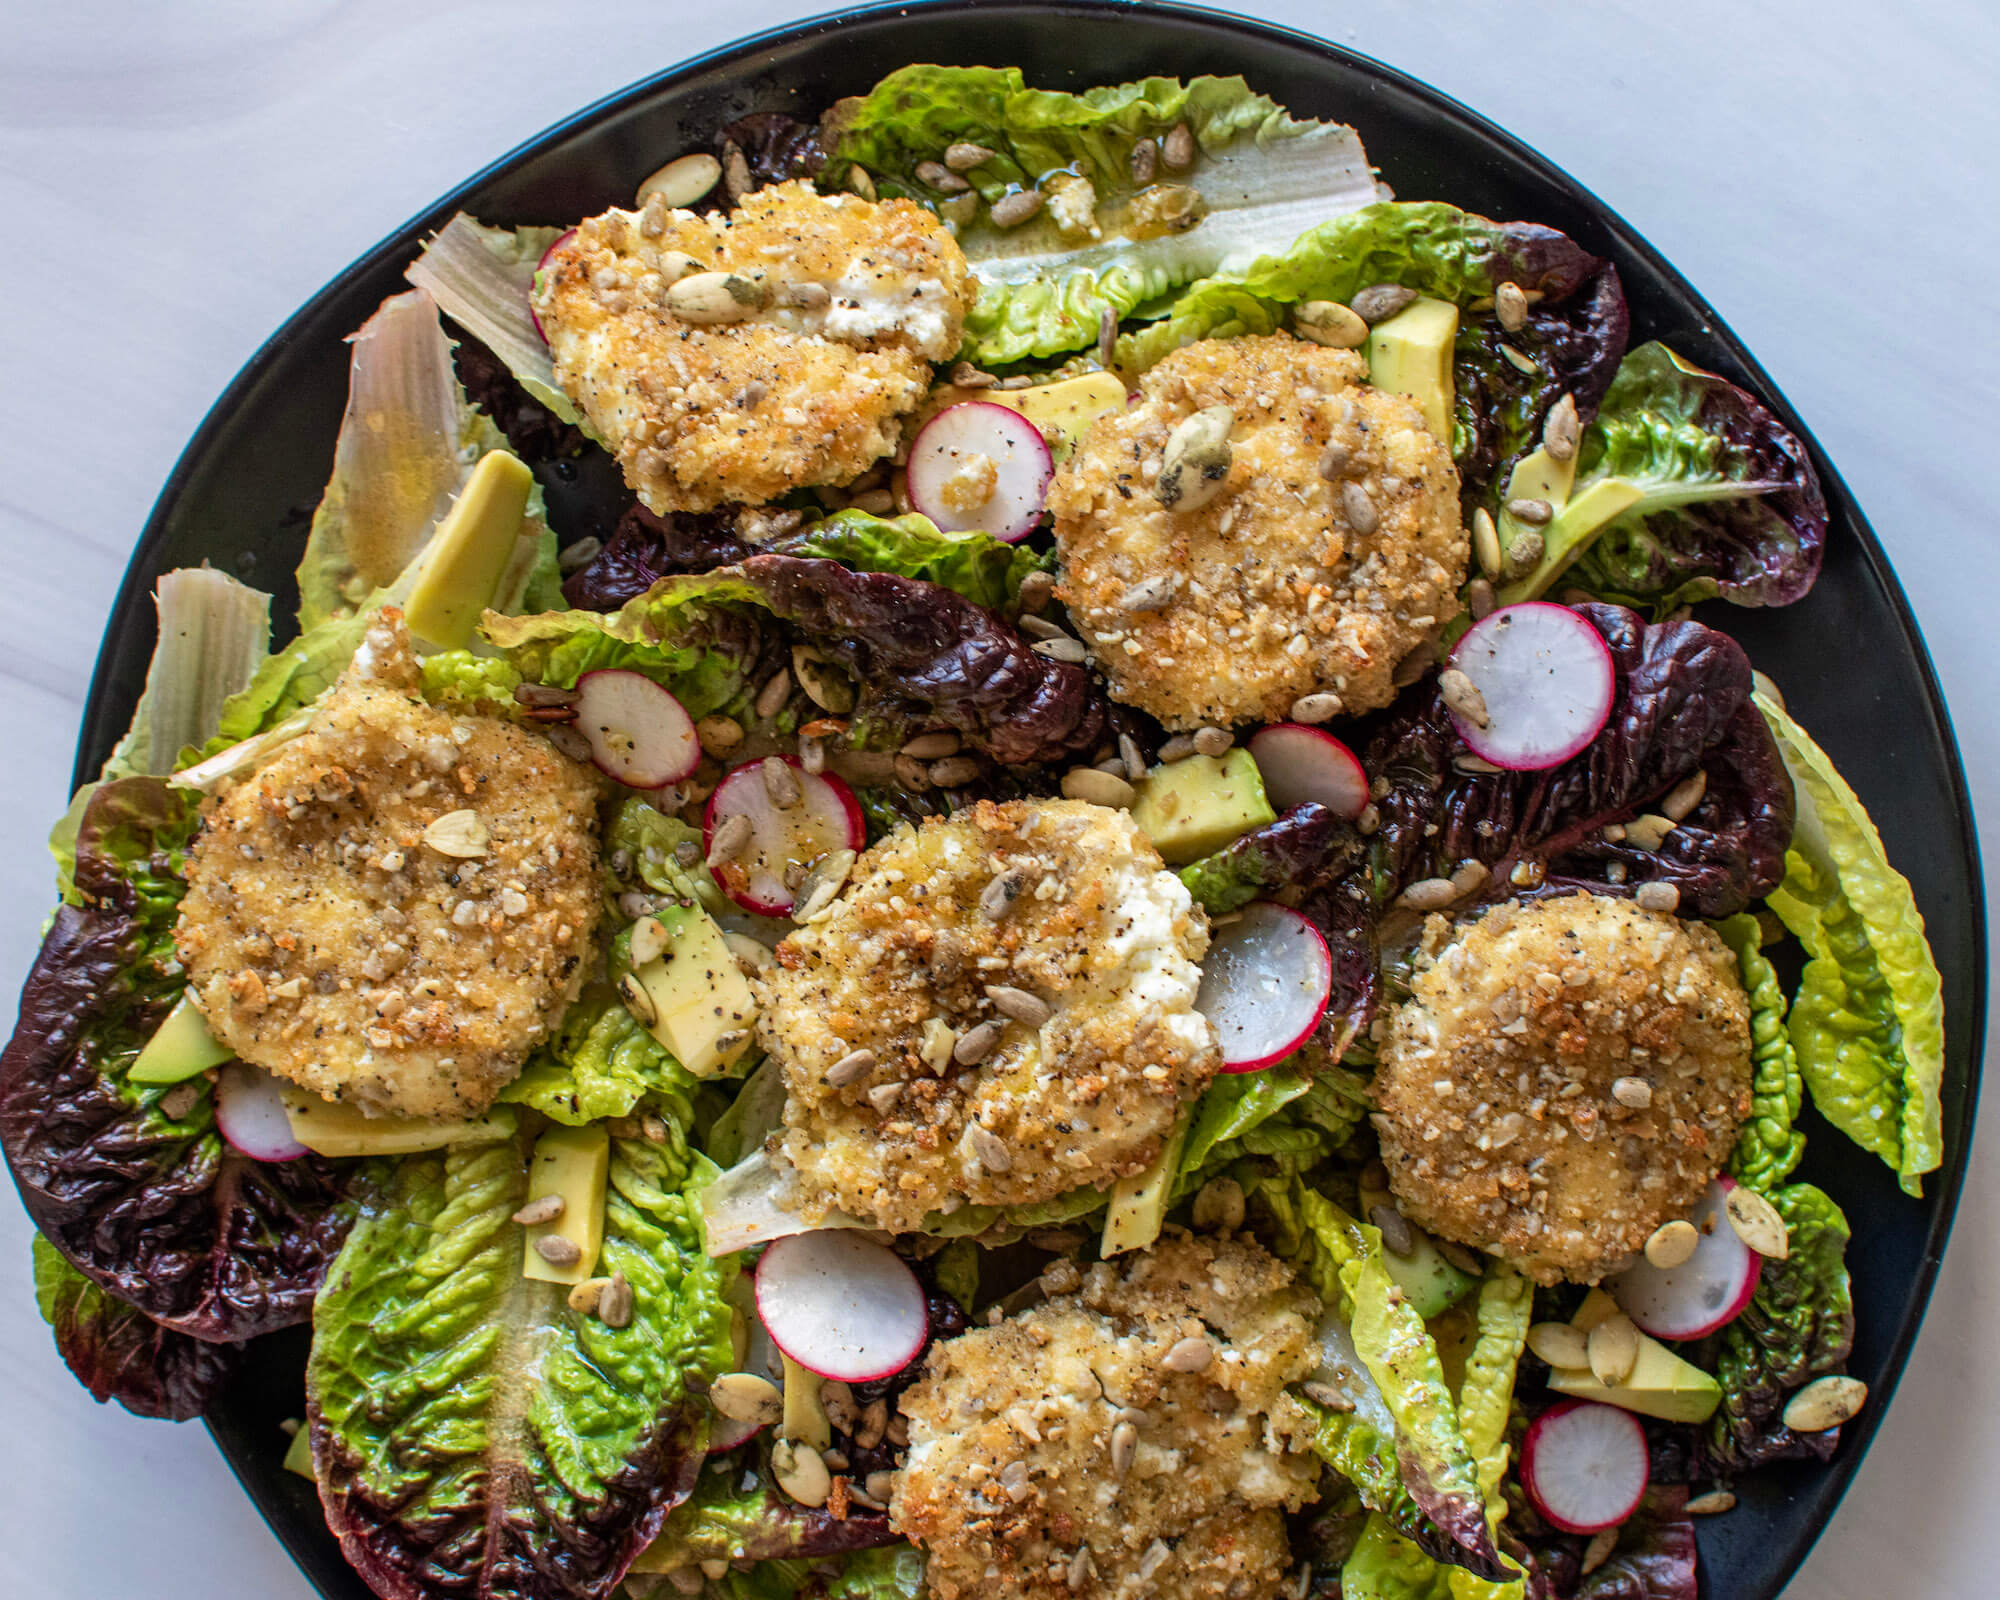 Warm Seed-Breaded Goat Cheese Medallions on Salad